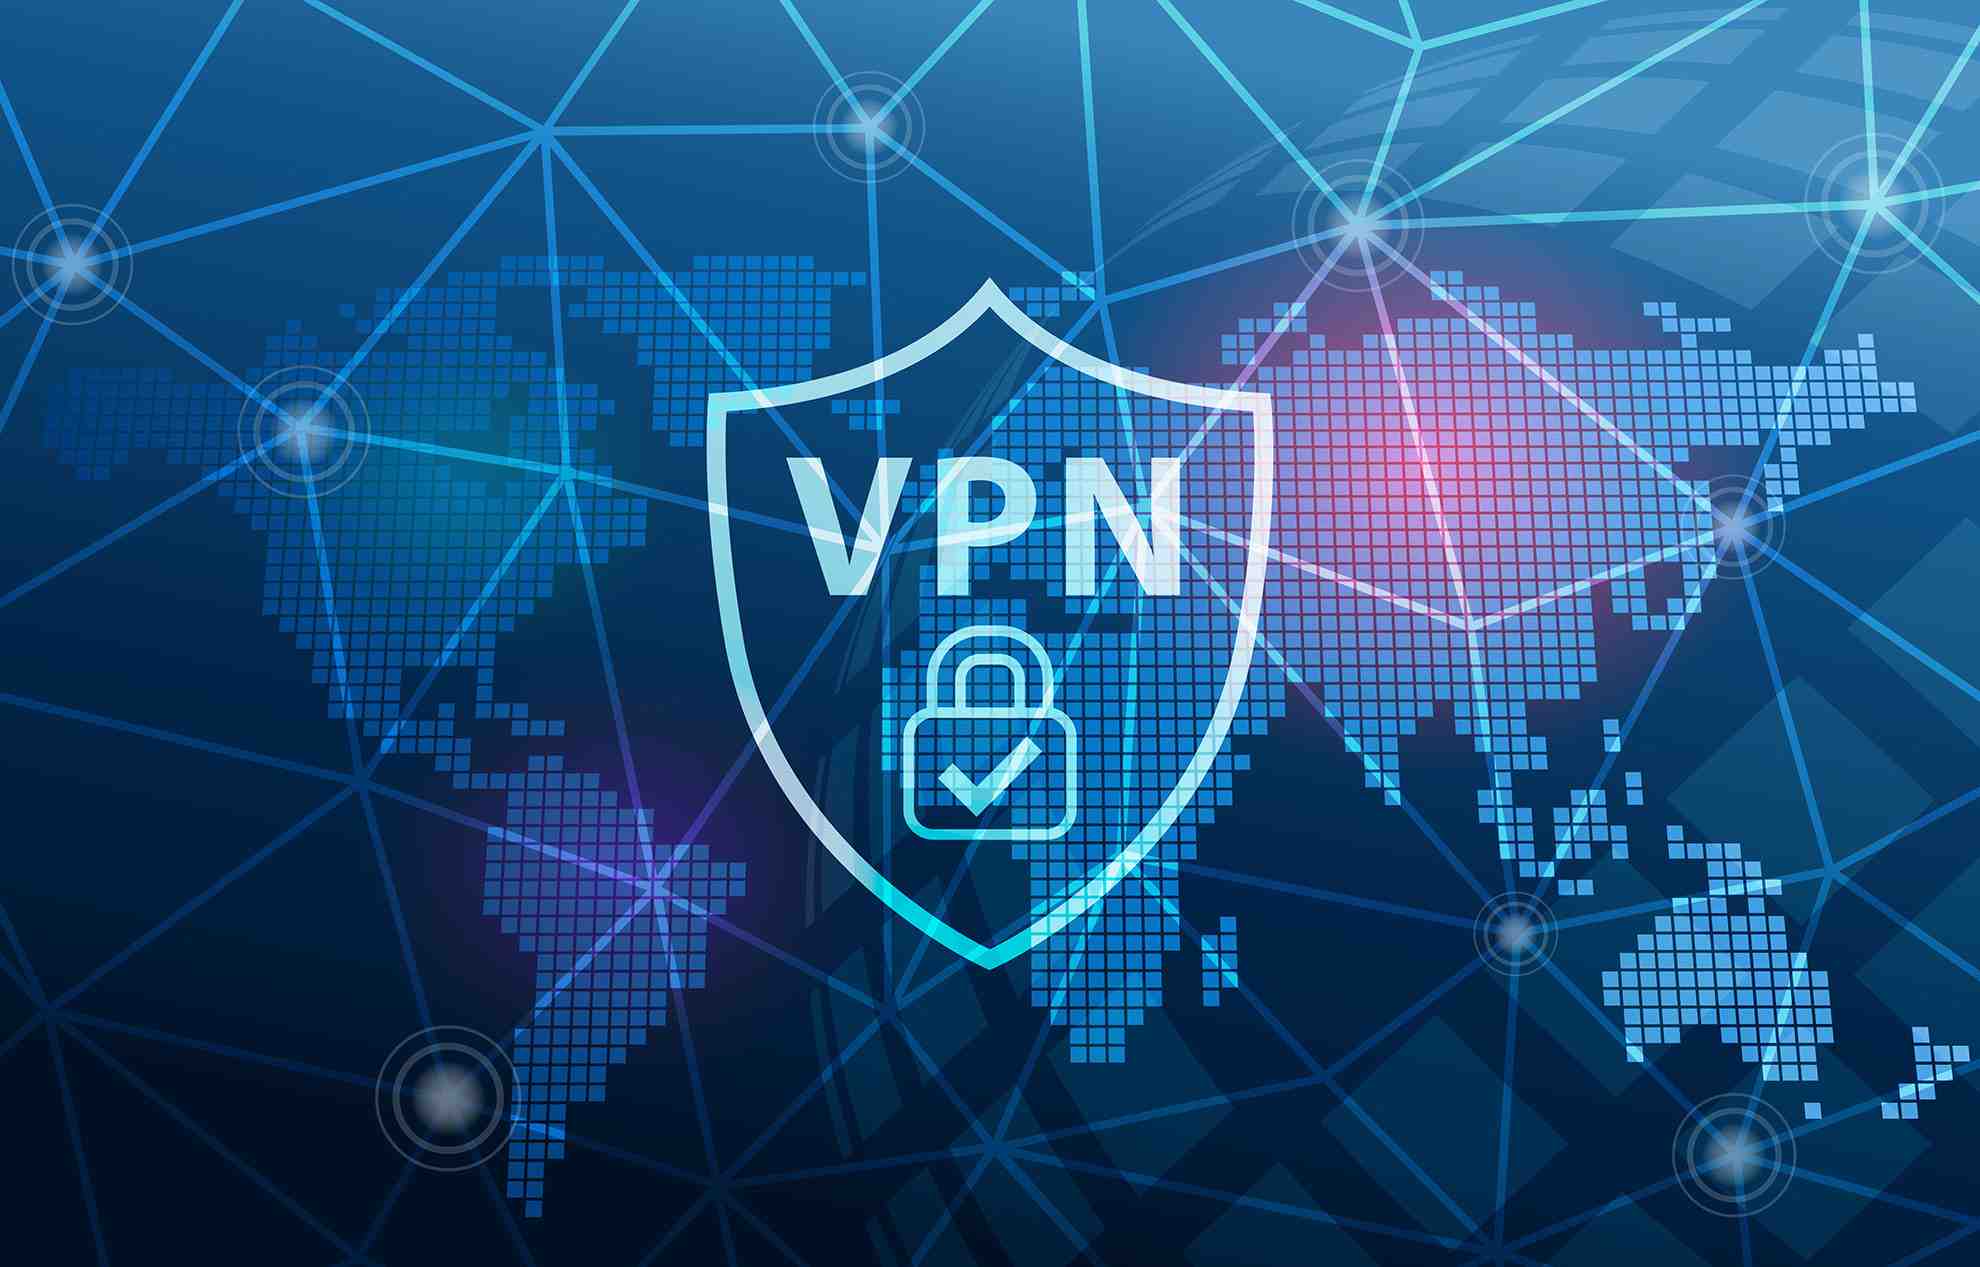 Can I get hacked with a VPN?